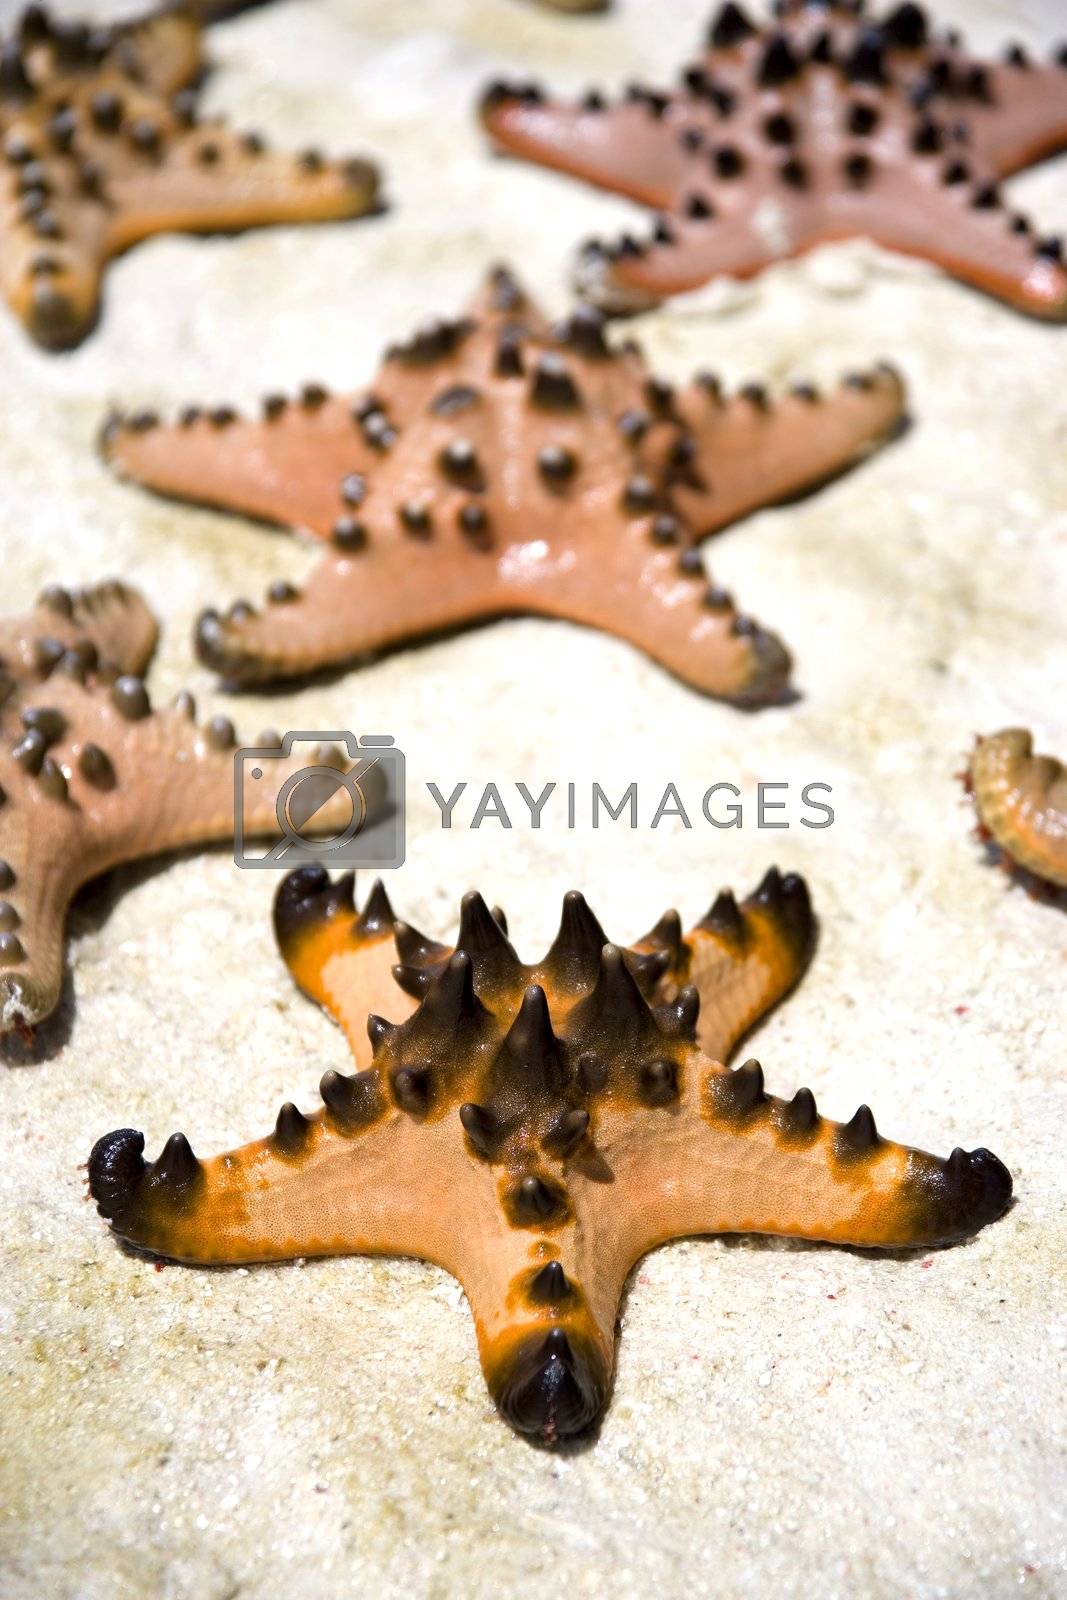 Royalty free image of Live Starfish Stranded on Sand by shariffc